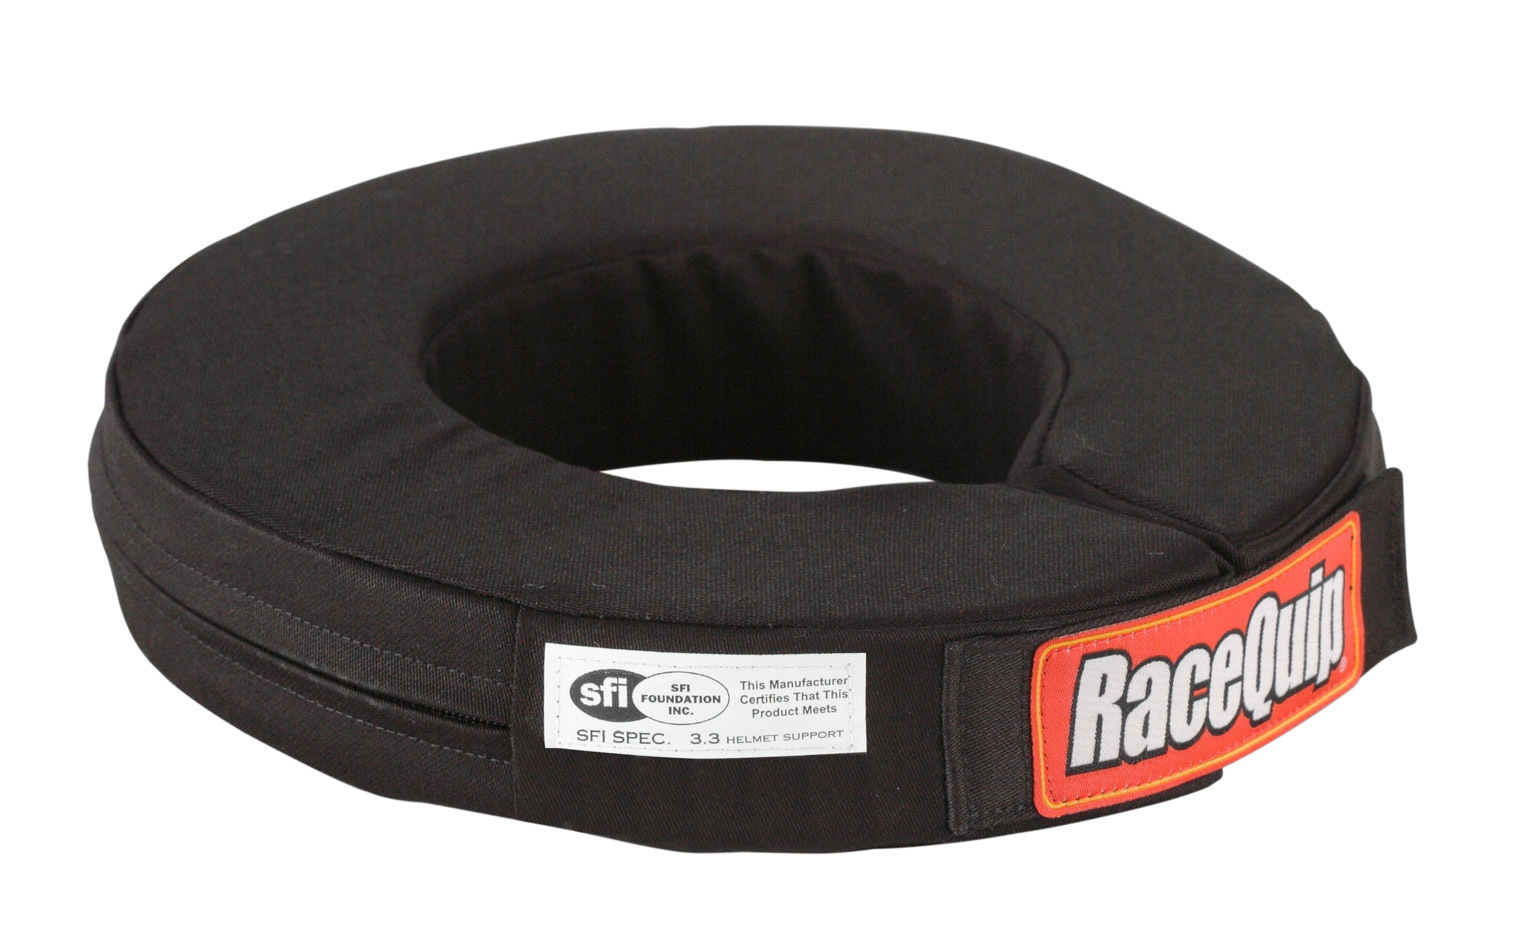 Racequip 3370097 - Neck Support, 360 Degree, SFI 3.3, Padded, Fire Retardant Cotton Cover, Black, Youth Size, Each